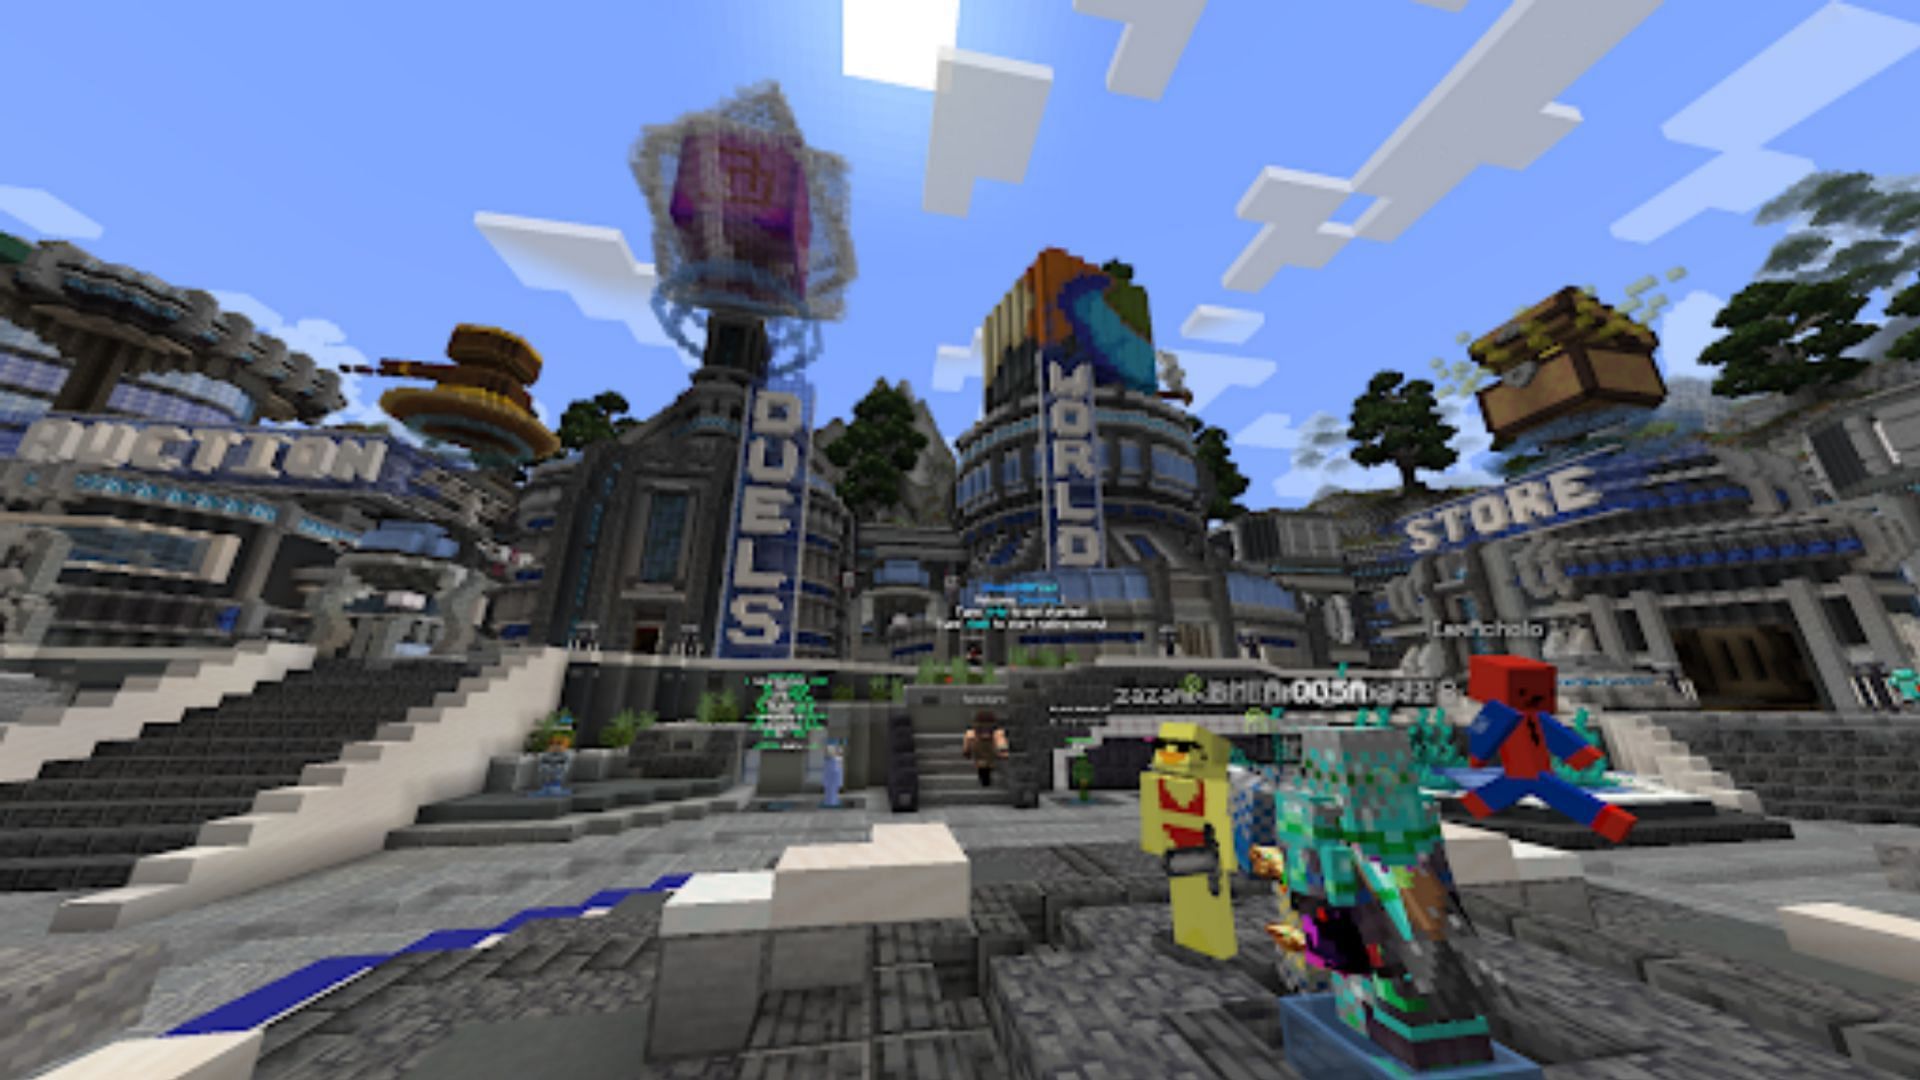 DonutSMP has quickly become one of the most visited Minecraft SMP servers (Image via Mojang Studios)